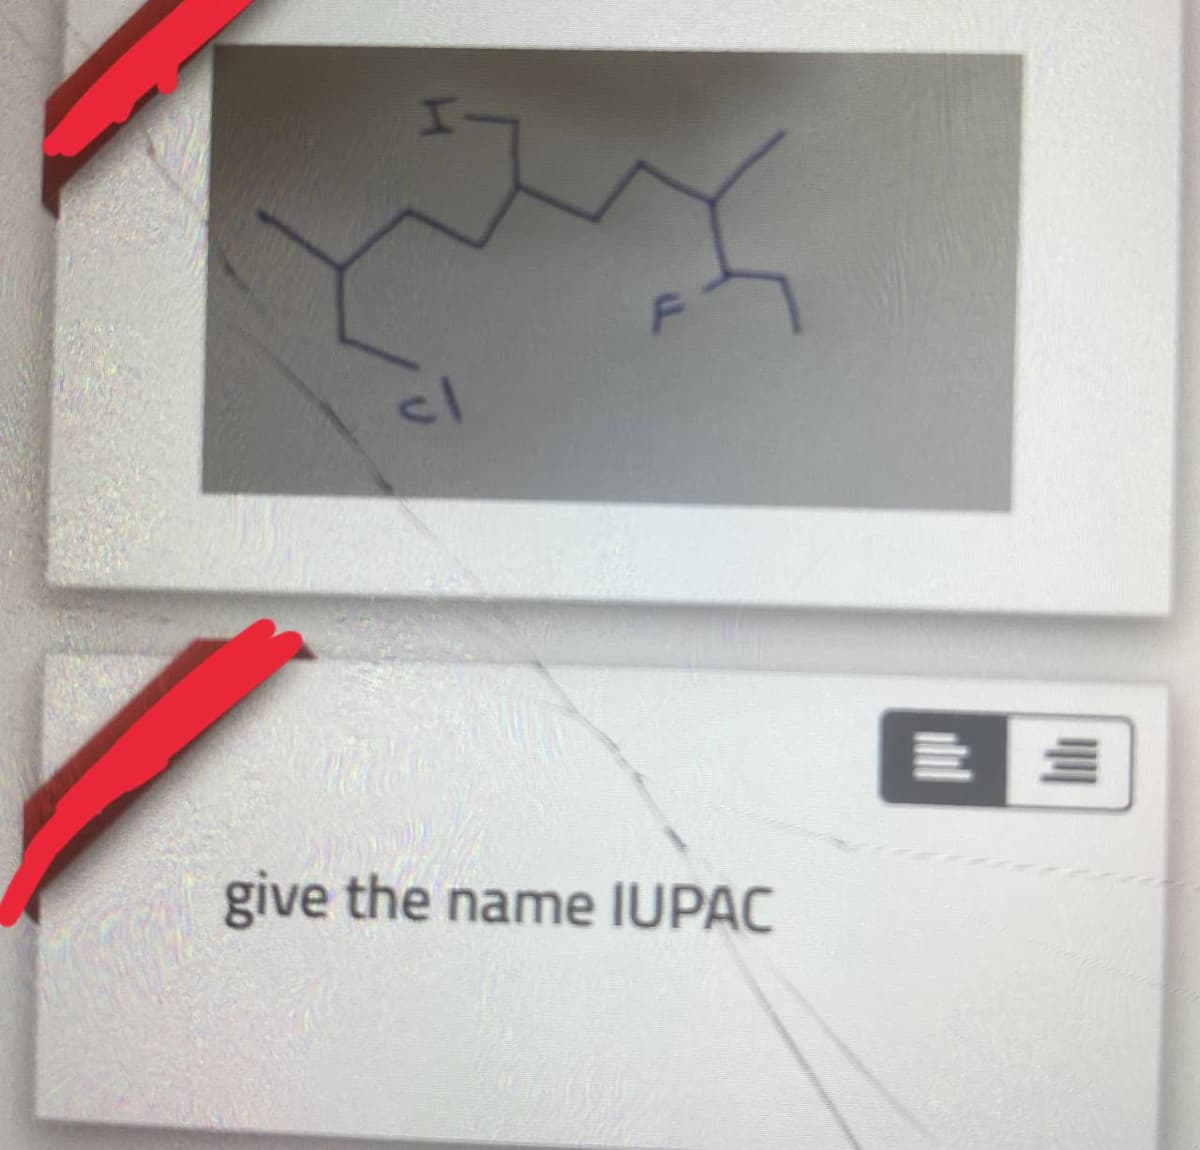 I-
cl
give the name IUPAC
